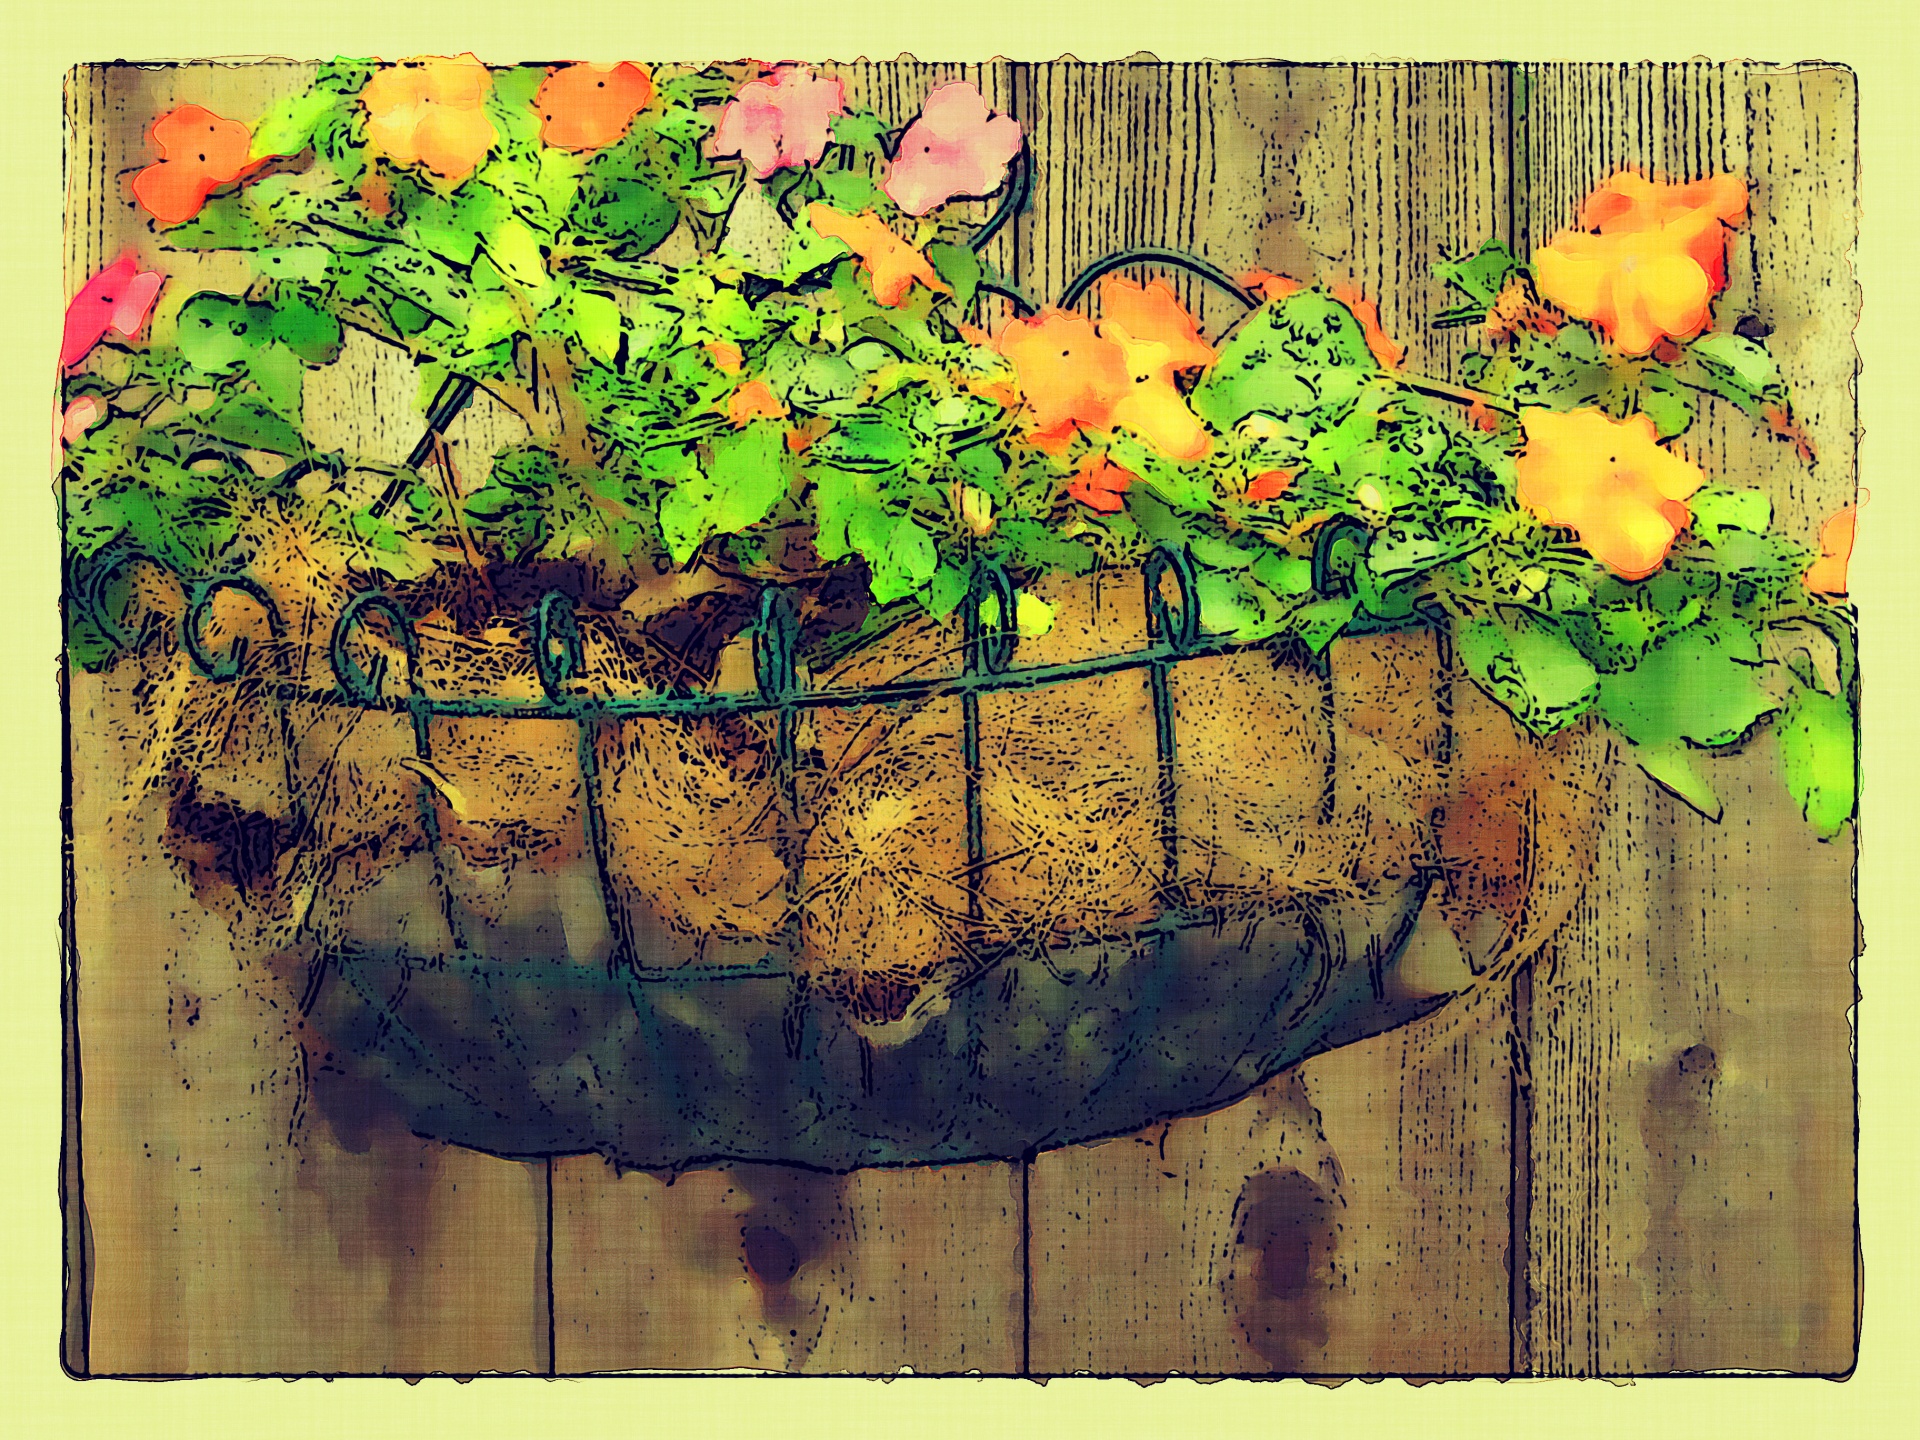 artistic rendering of a flower basket hanging on a wooden fence